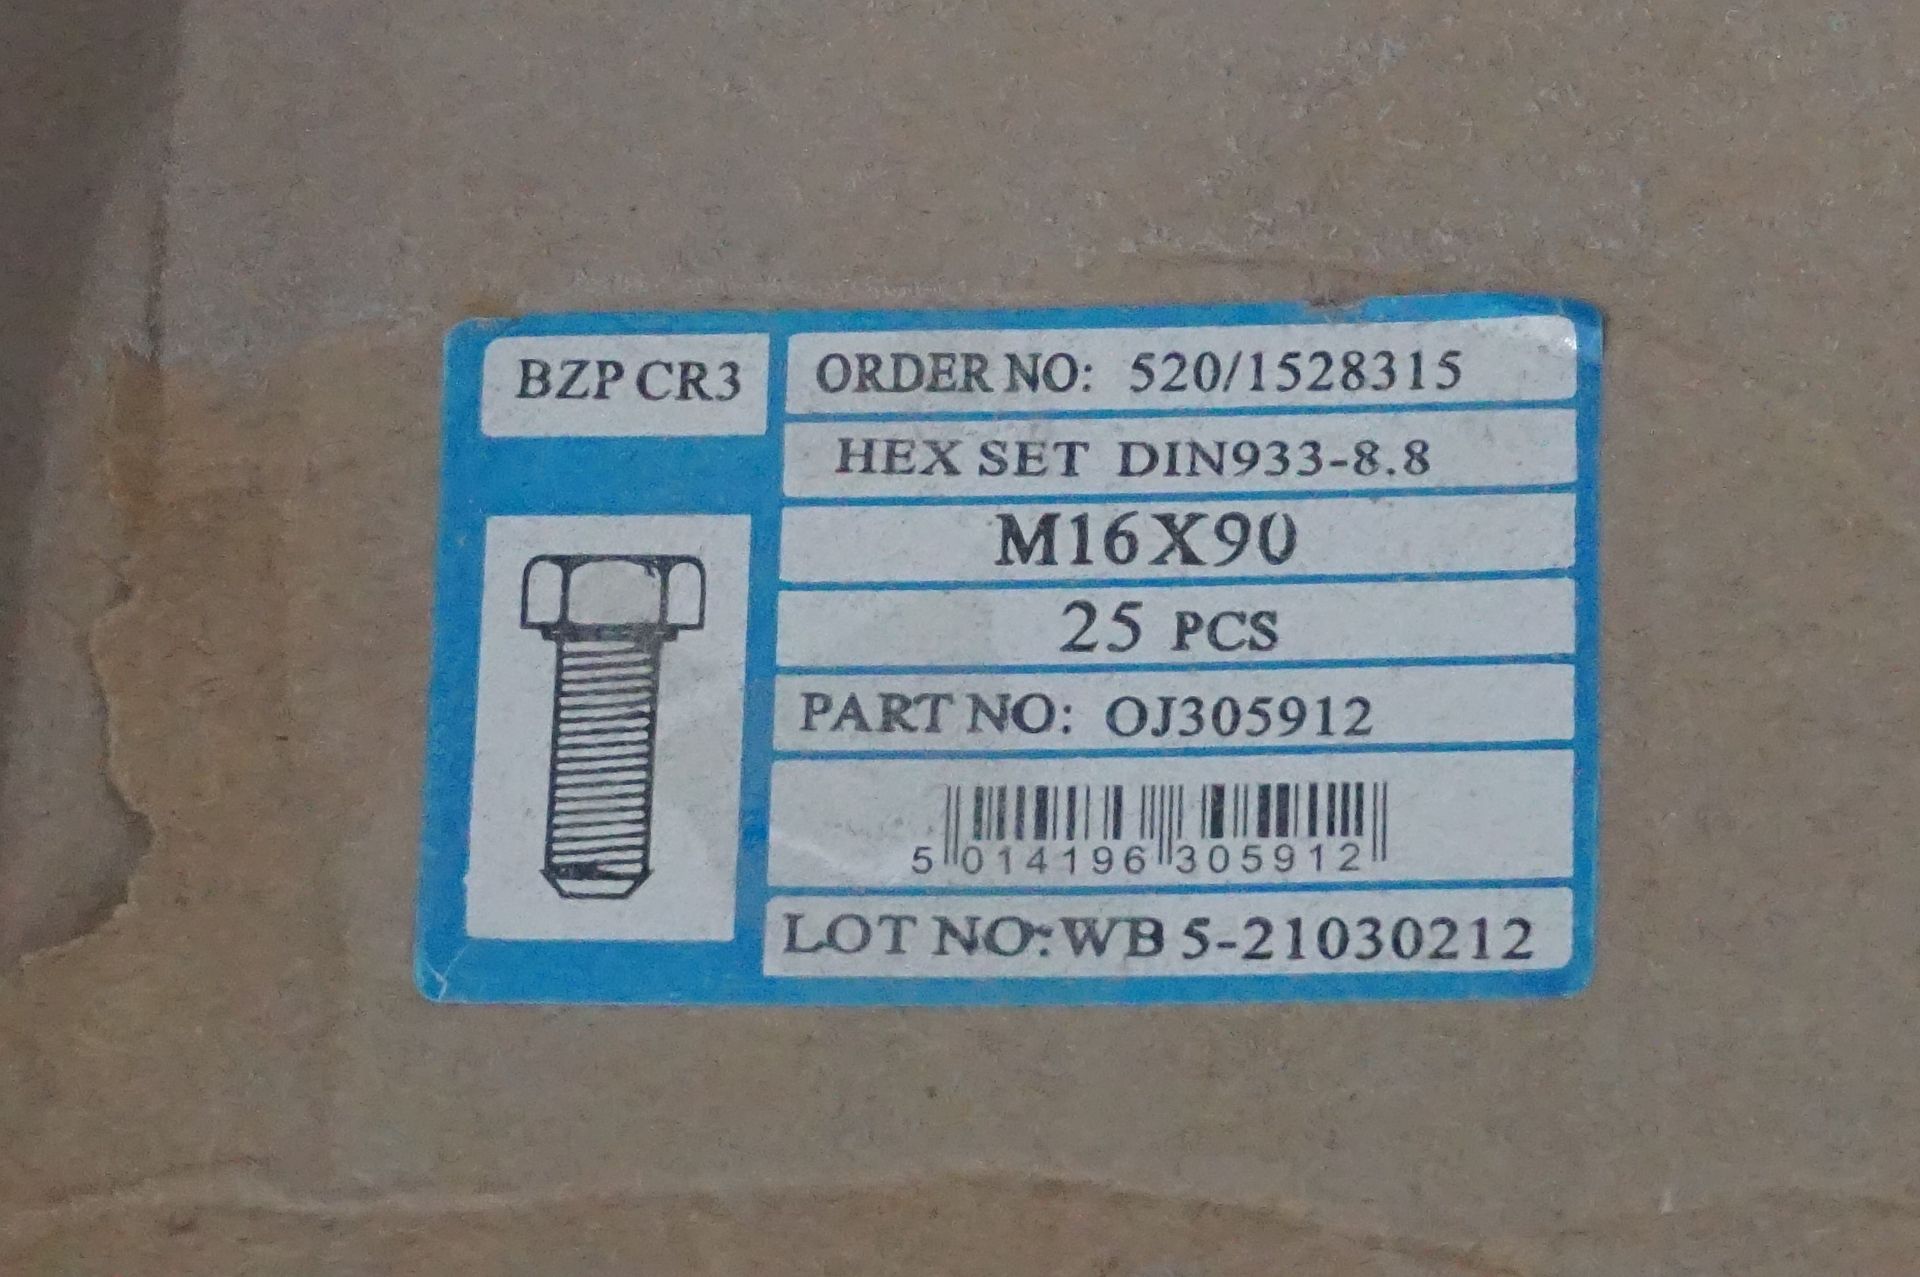 1x (no.) pallet of Rothoblaas screws LBS 5 x 50 qty approx. 10,000 self tapping wood screws and a - Image 17 of 21